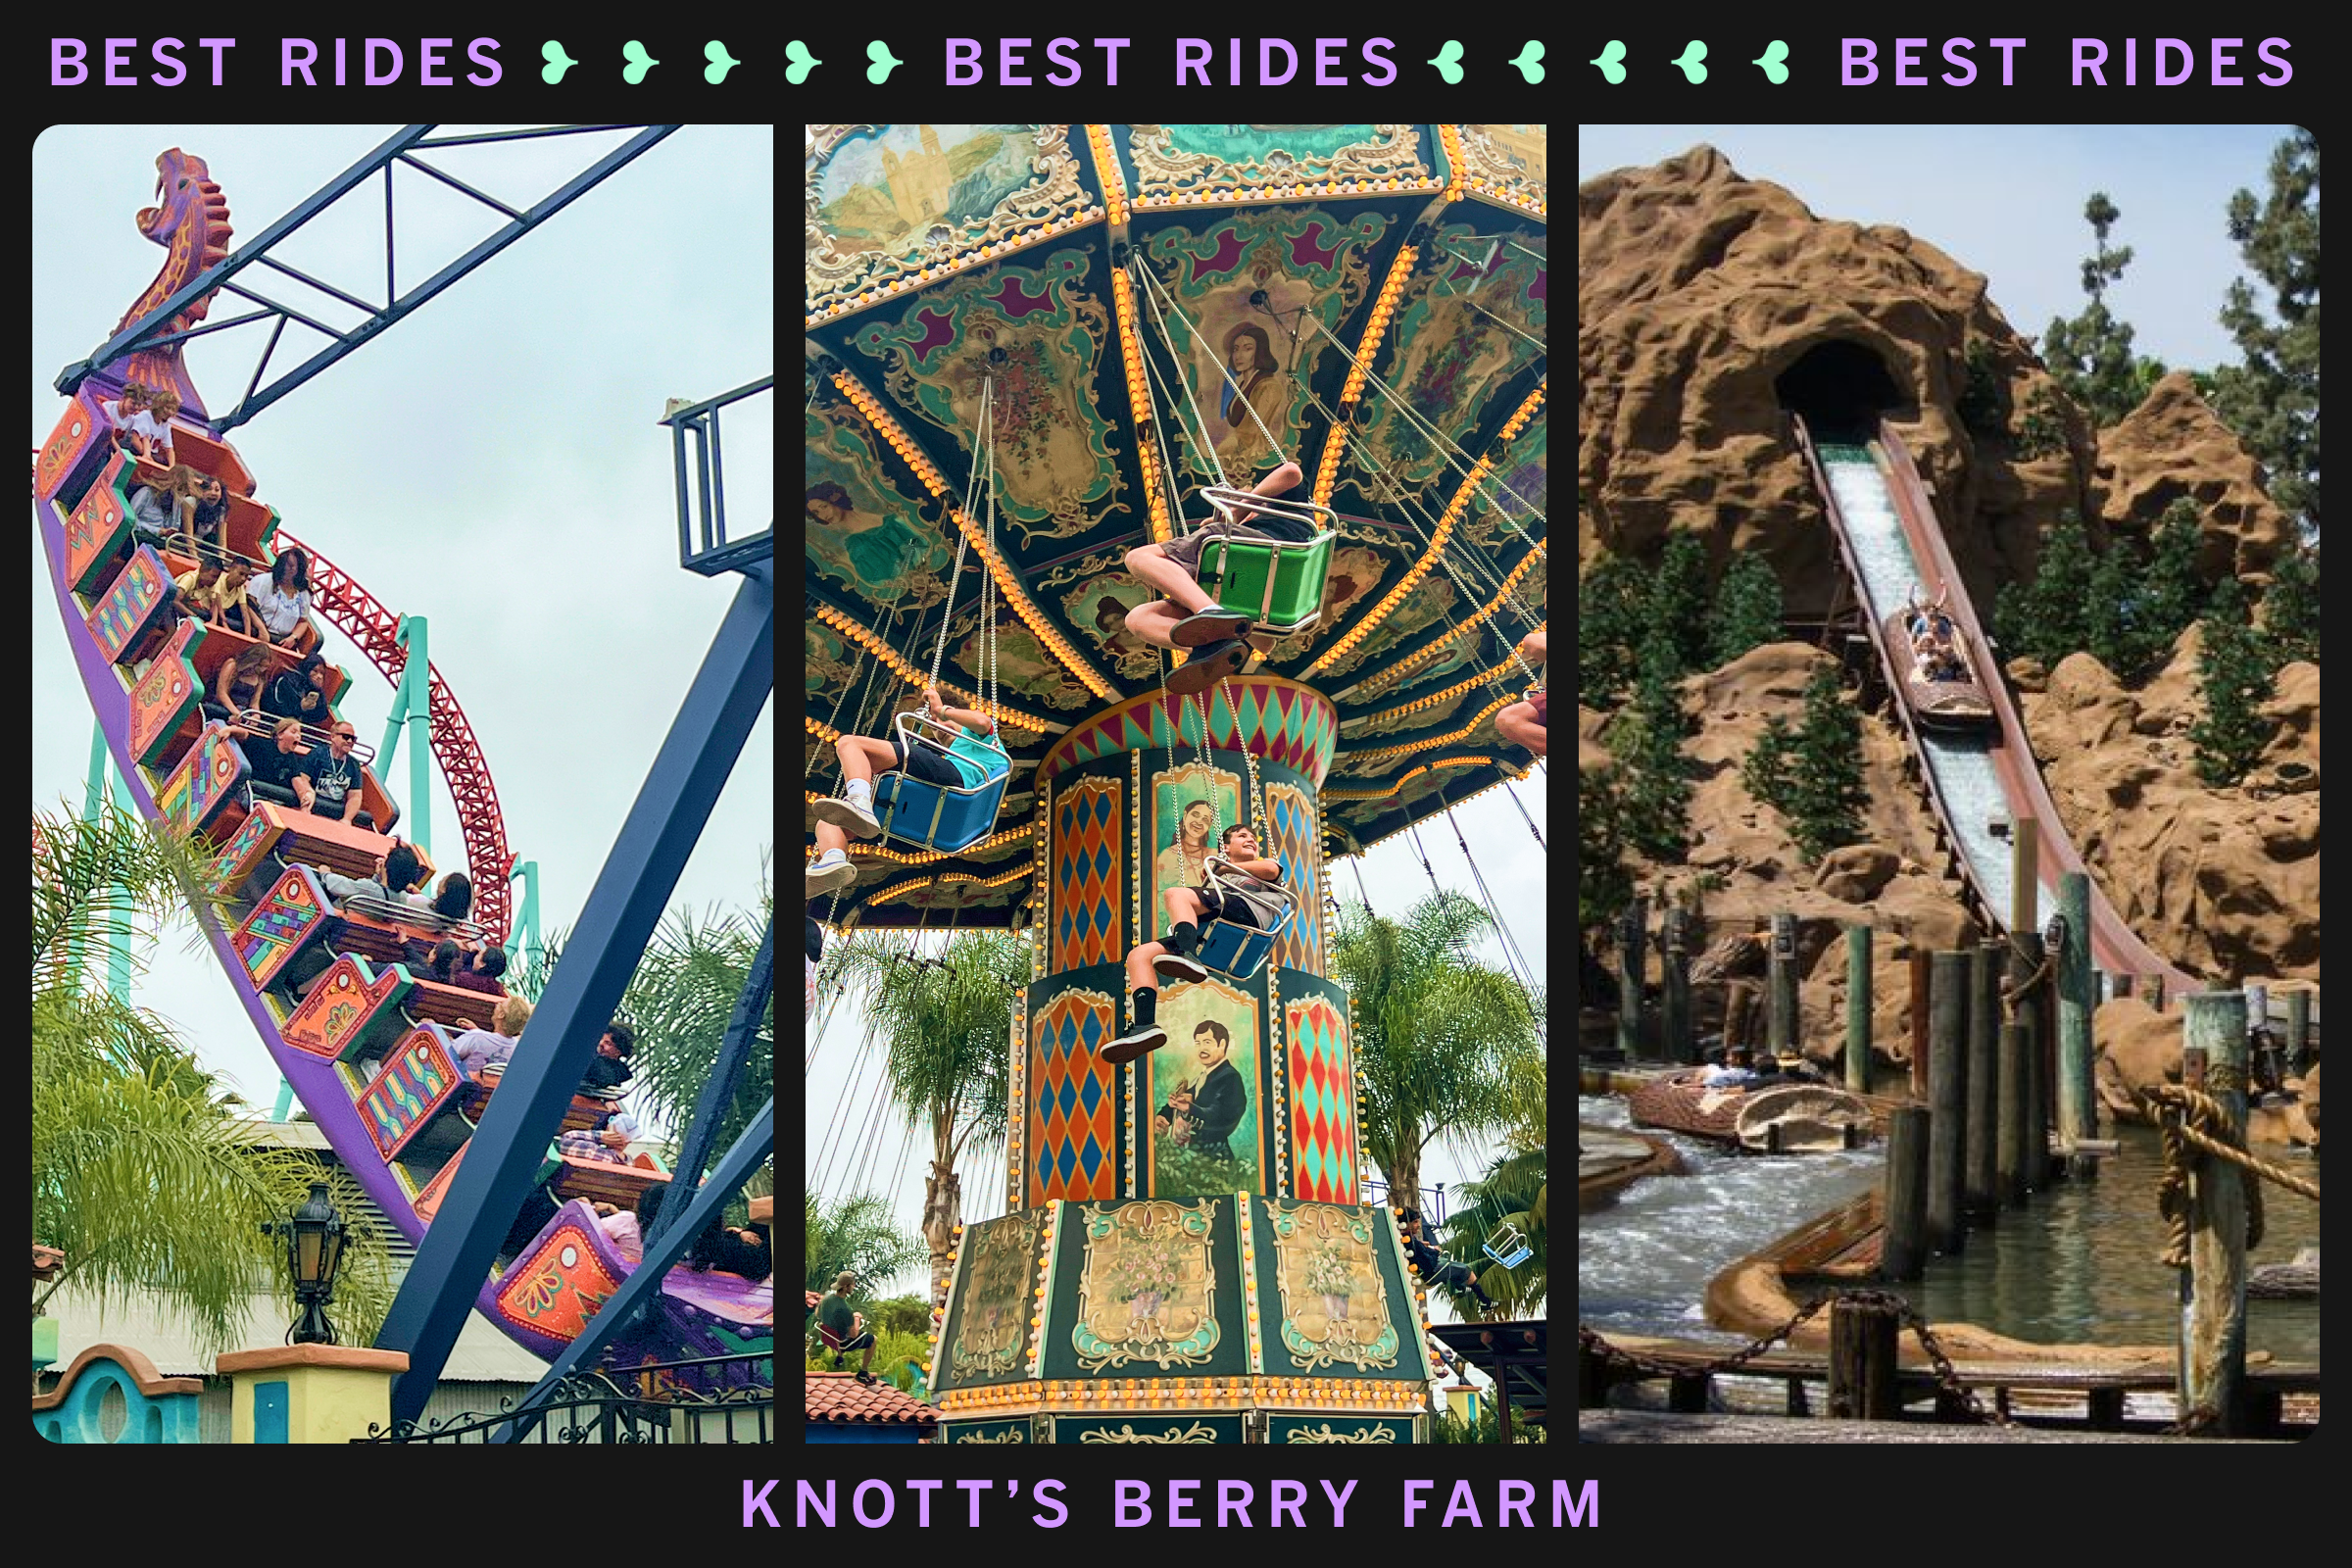 Best rides from Knotts Berry Farm